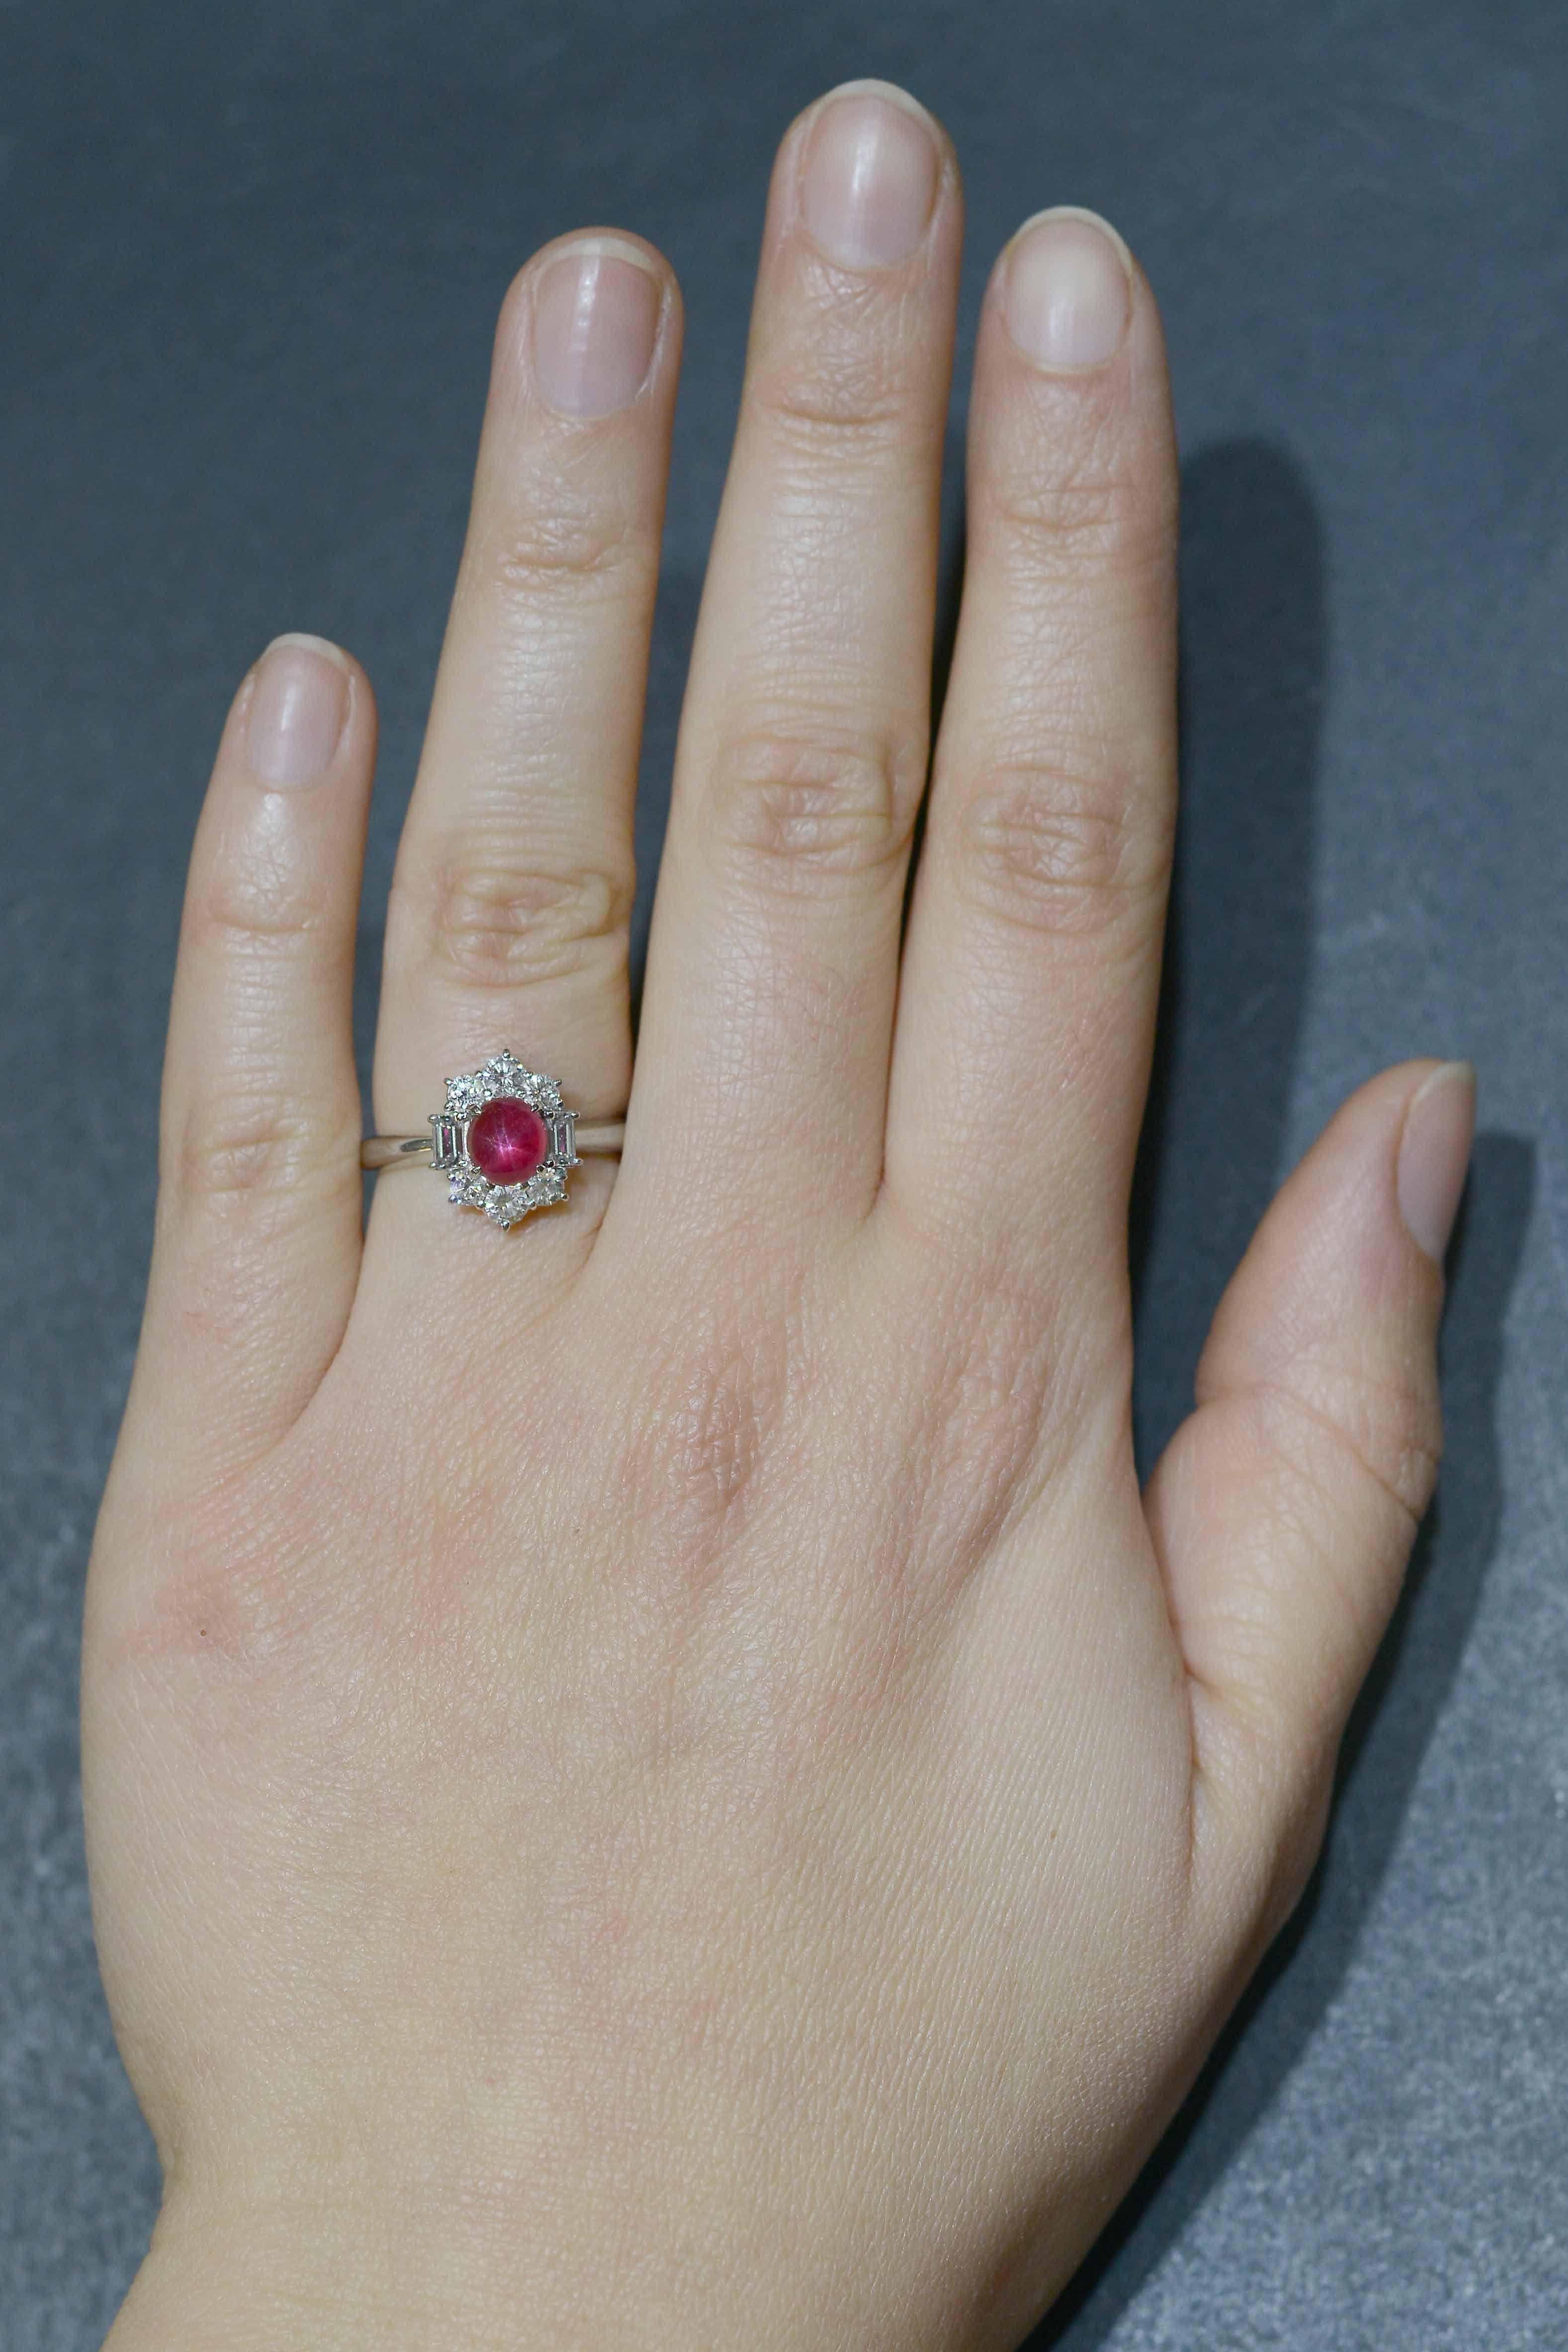 A stellar mid-century ring featuring an exceptional star ruby with a bright center and dramatic, vivid legs. This anomalous gemstone is surrounded by a tiara of glimmering, colorless diamonds in a ballerina-style setting flaunting a variety of round